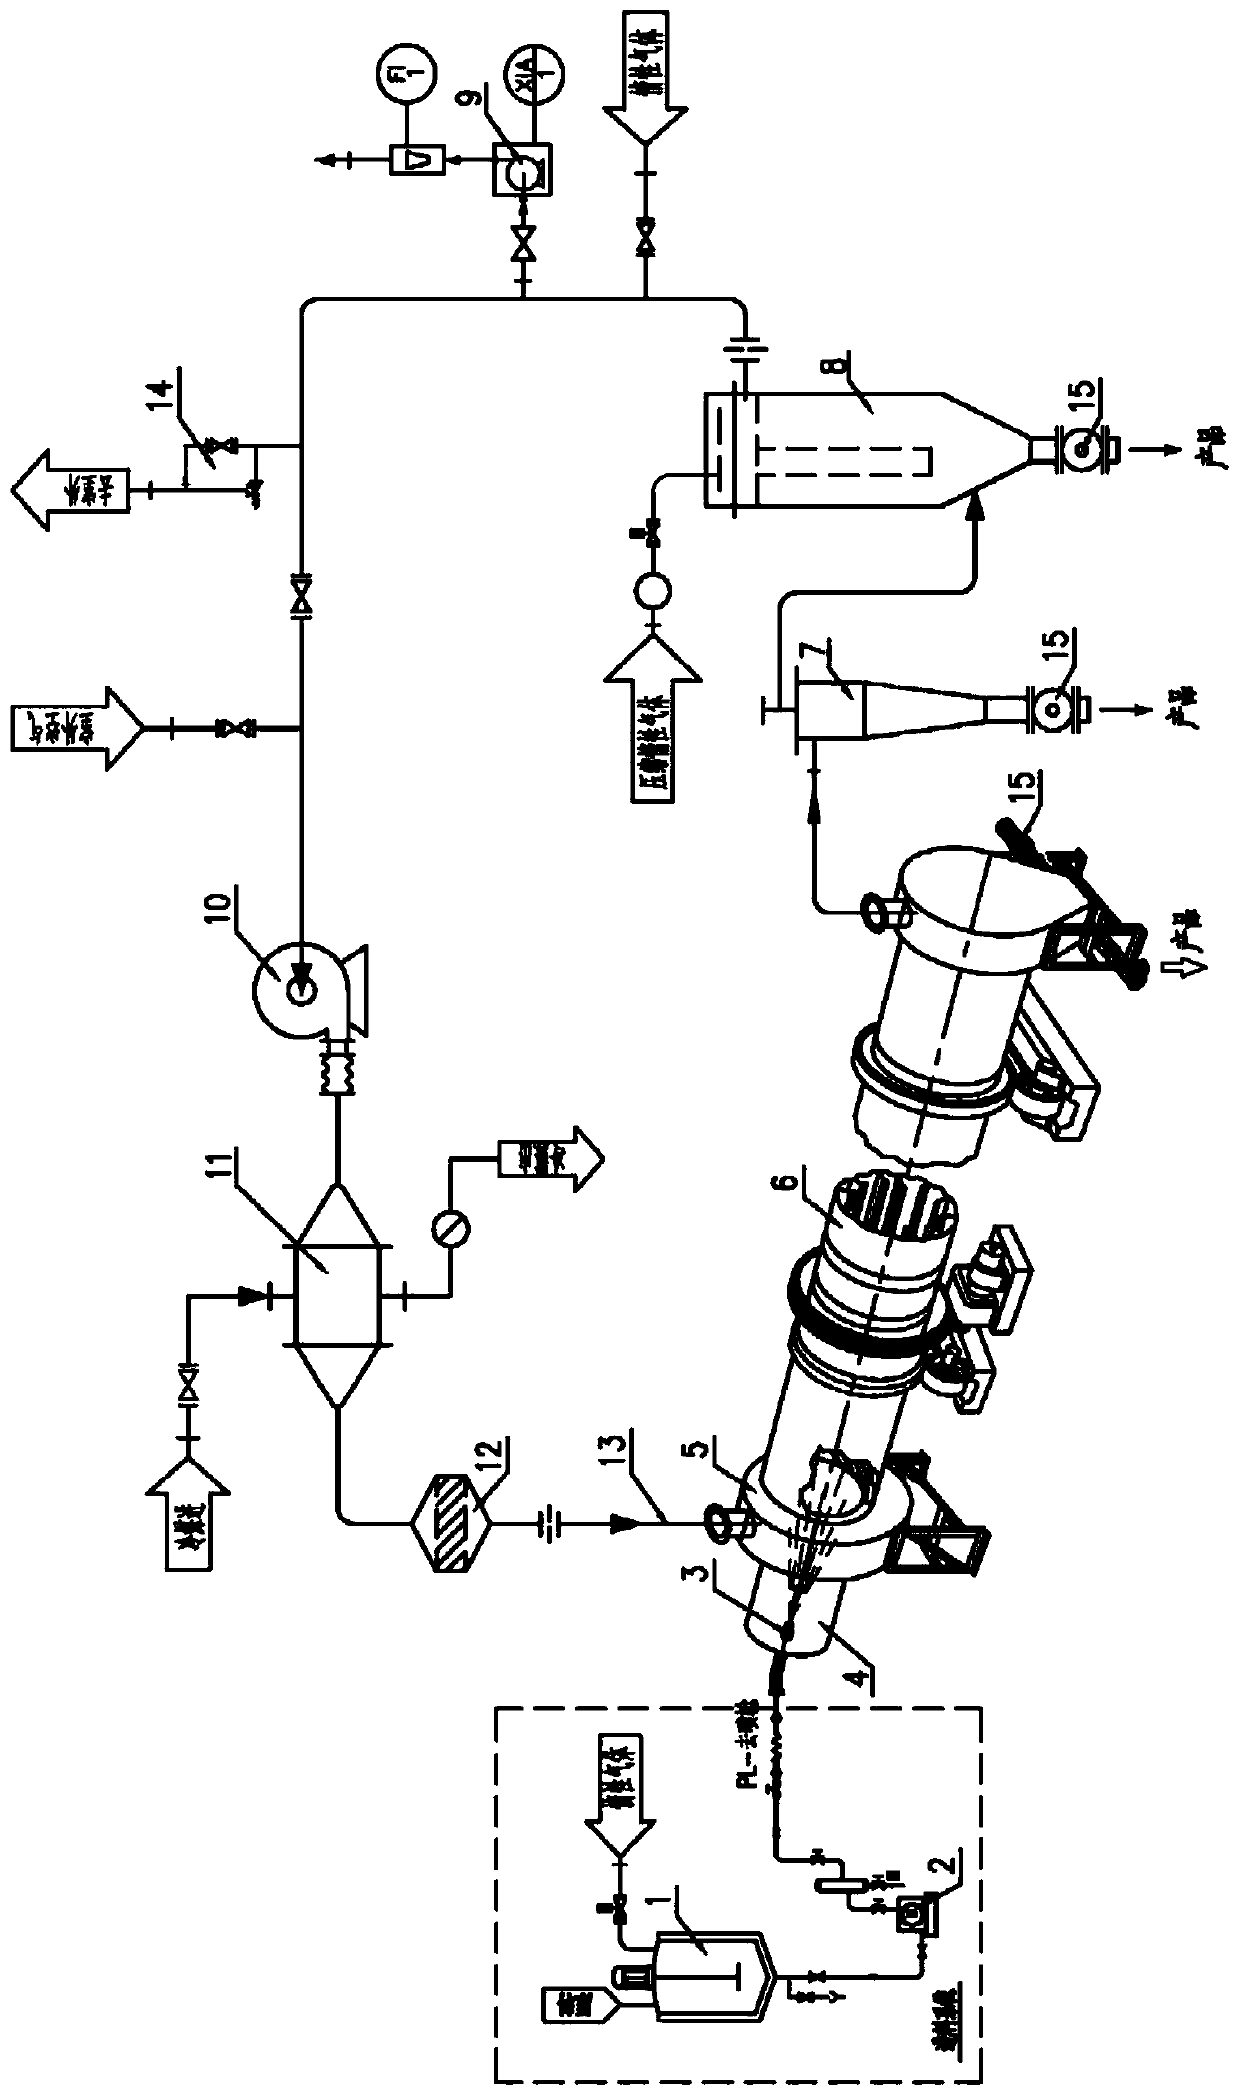 Spray reaction device for closed cycle preparation of insoluble sulfur